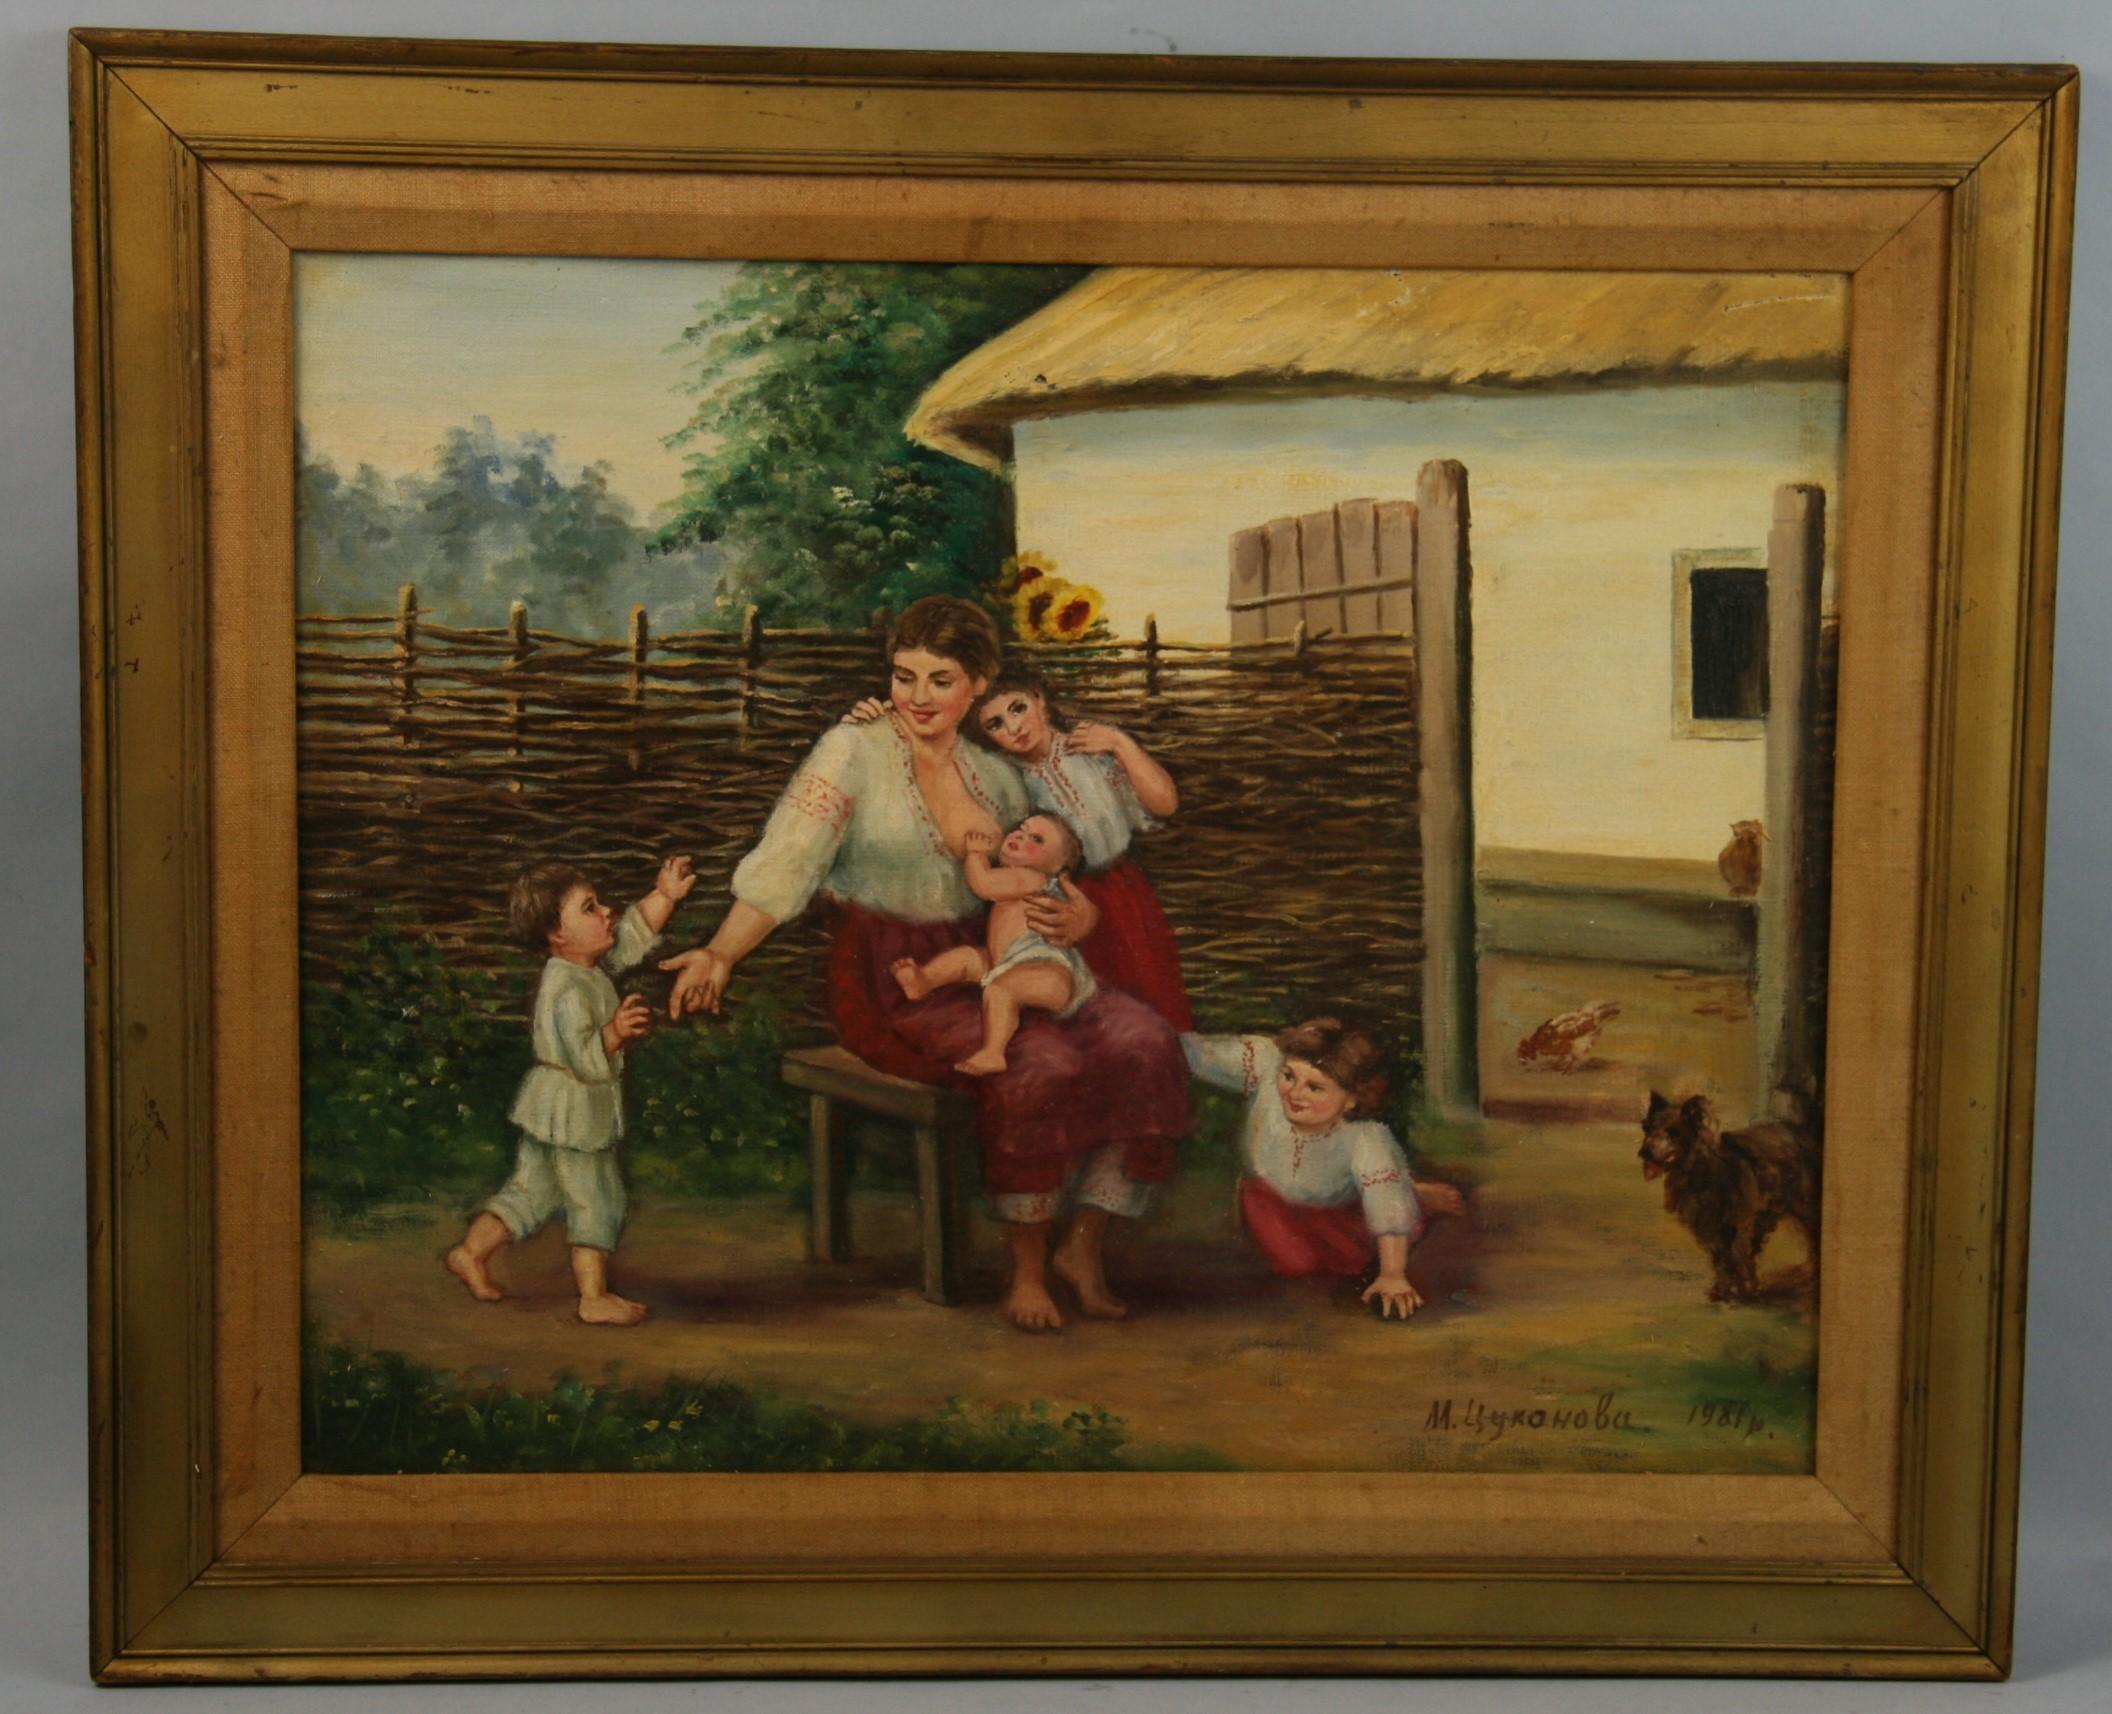 Unknown Landscape Painting - Vintage French Rural Family Farm Scene Oil Painting on Canvas 1981